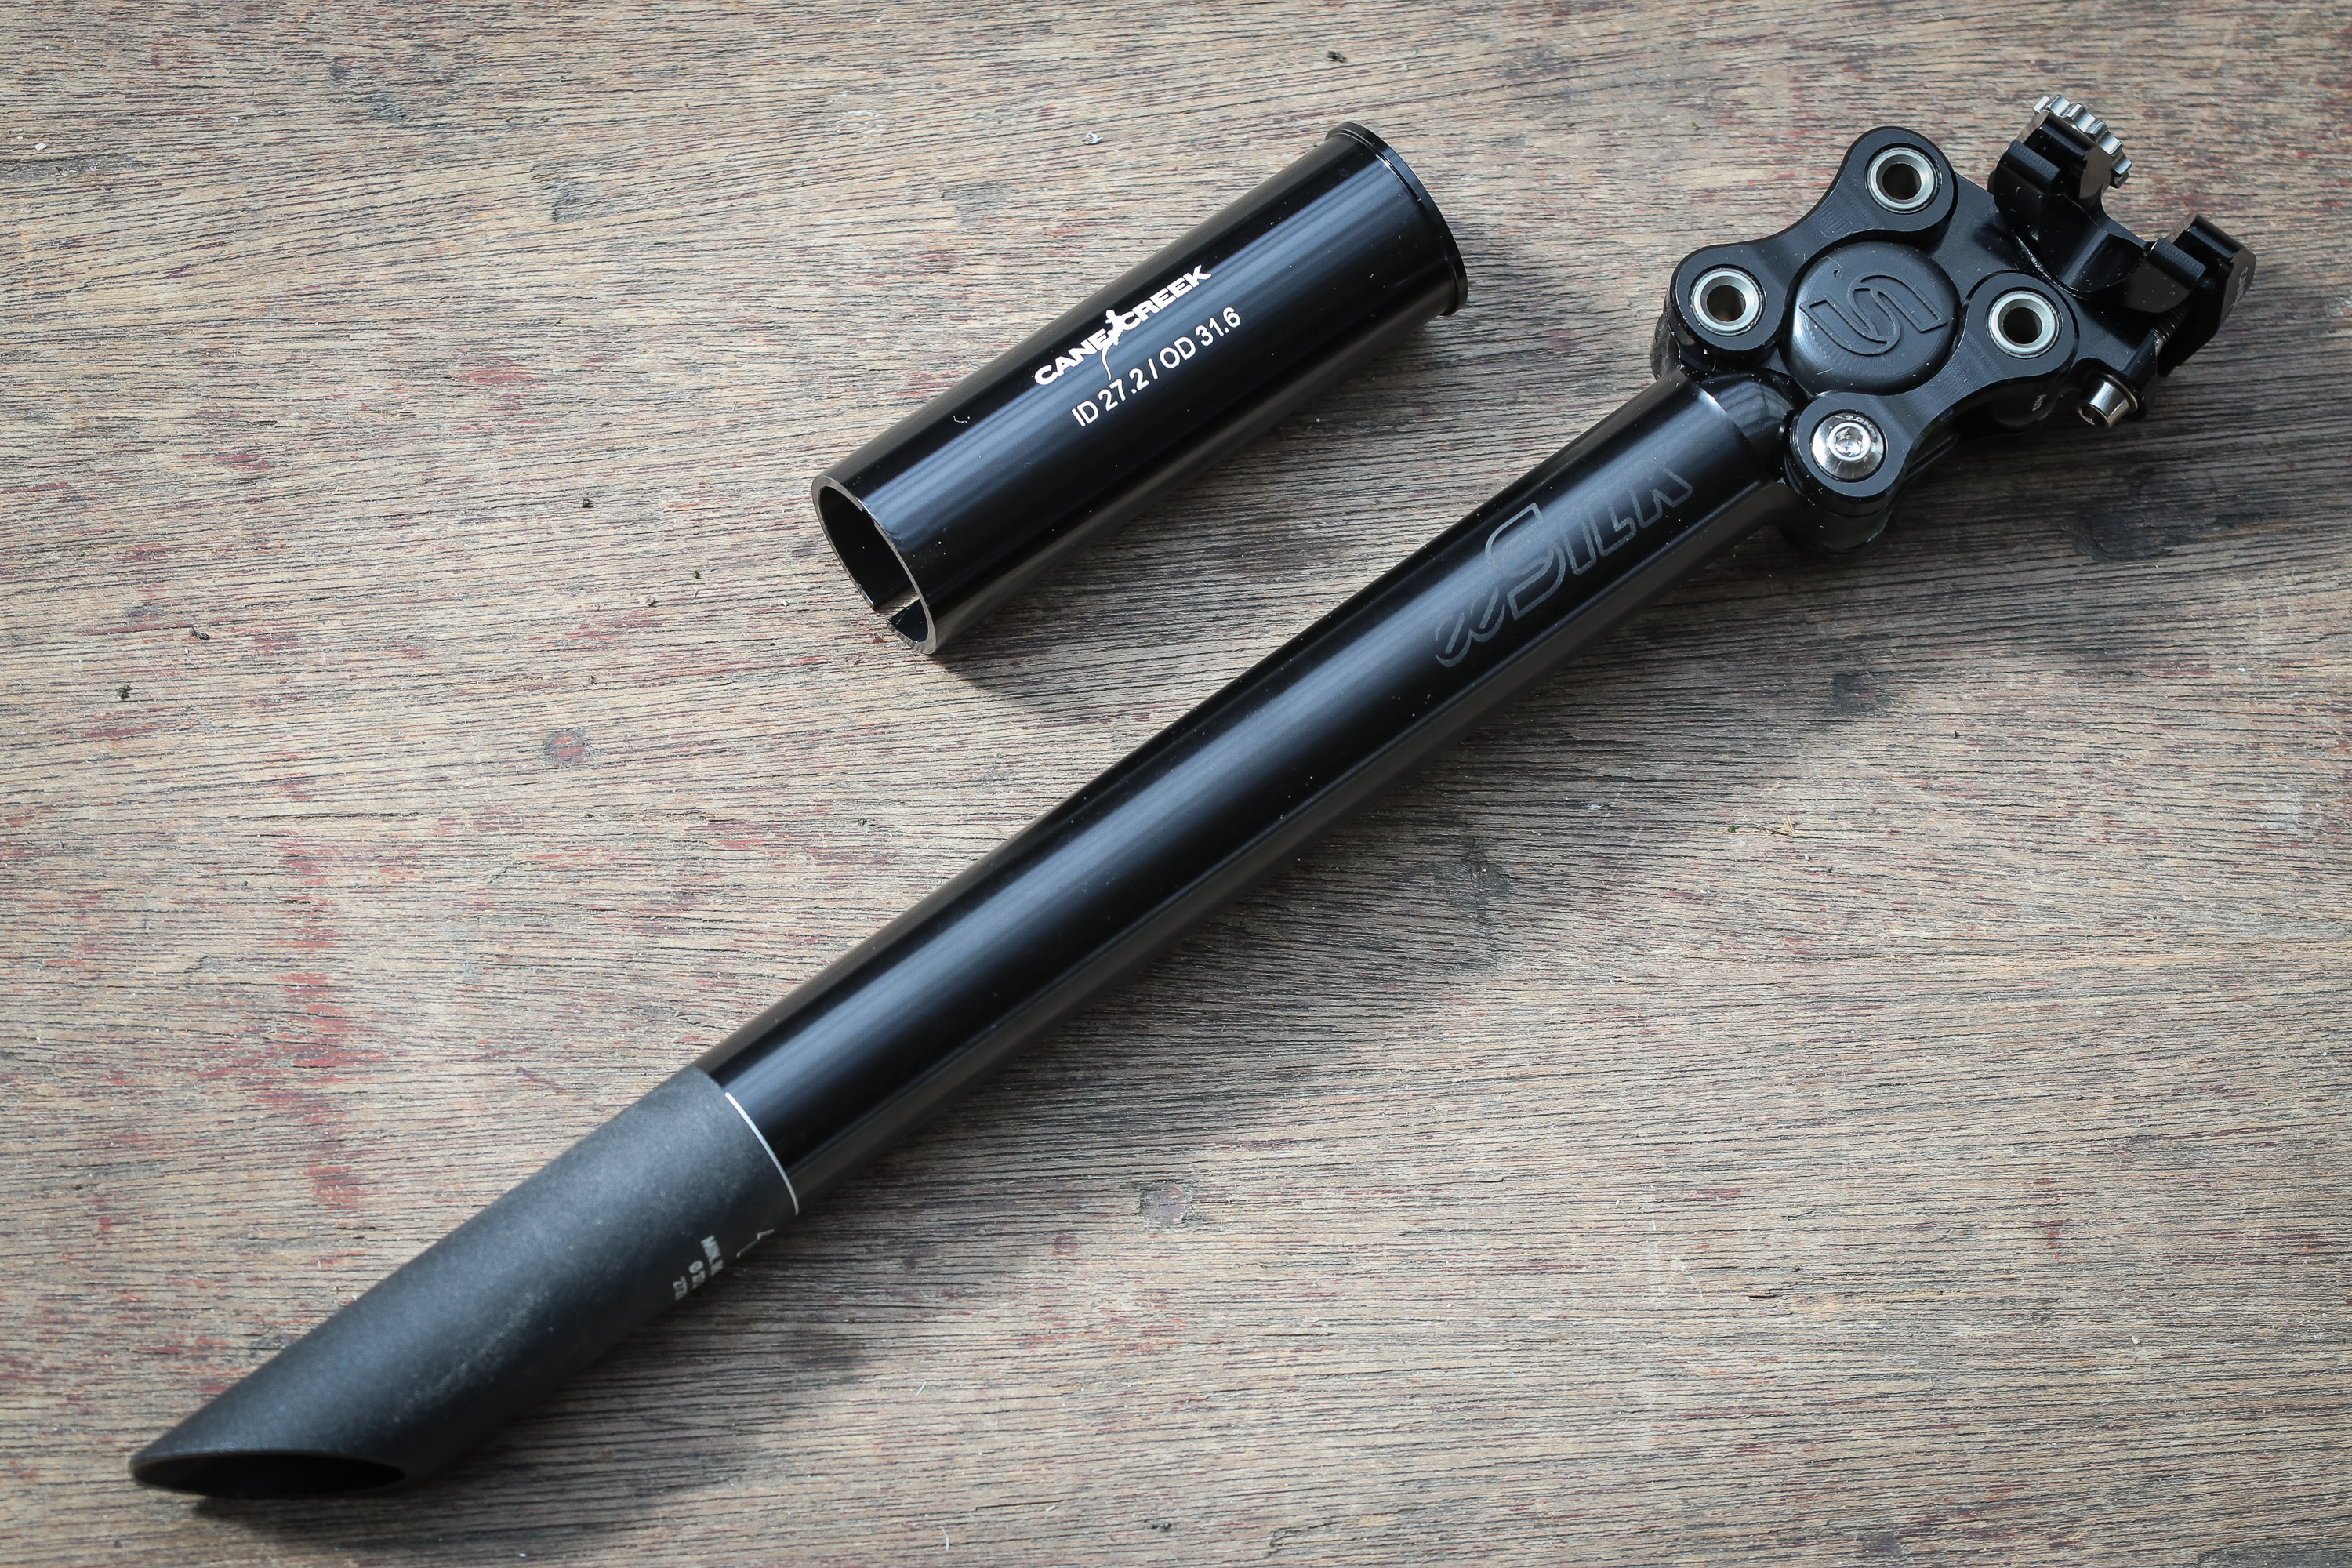 thudbuster seatpost review